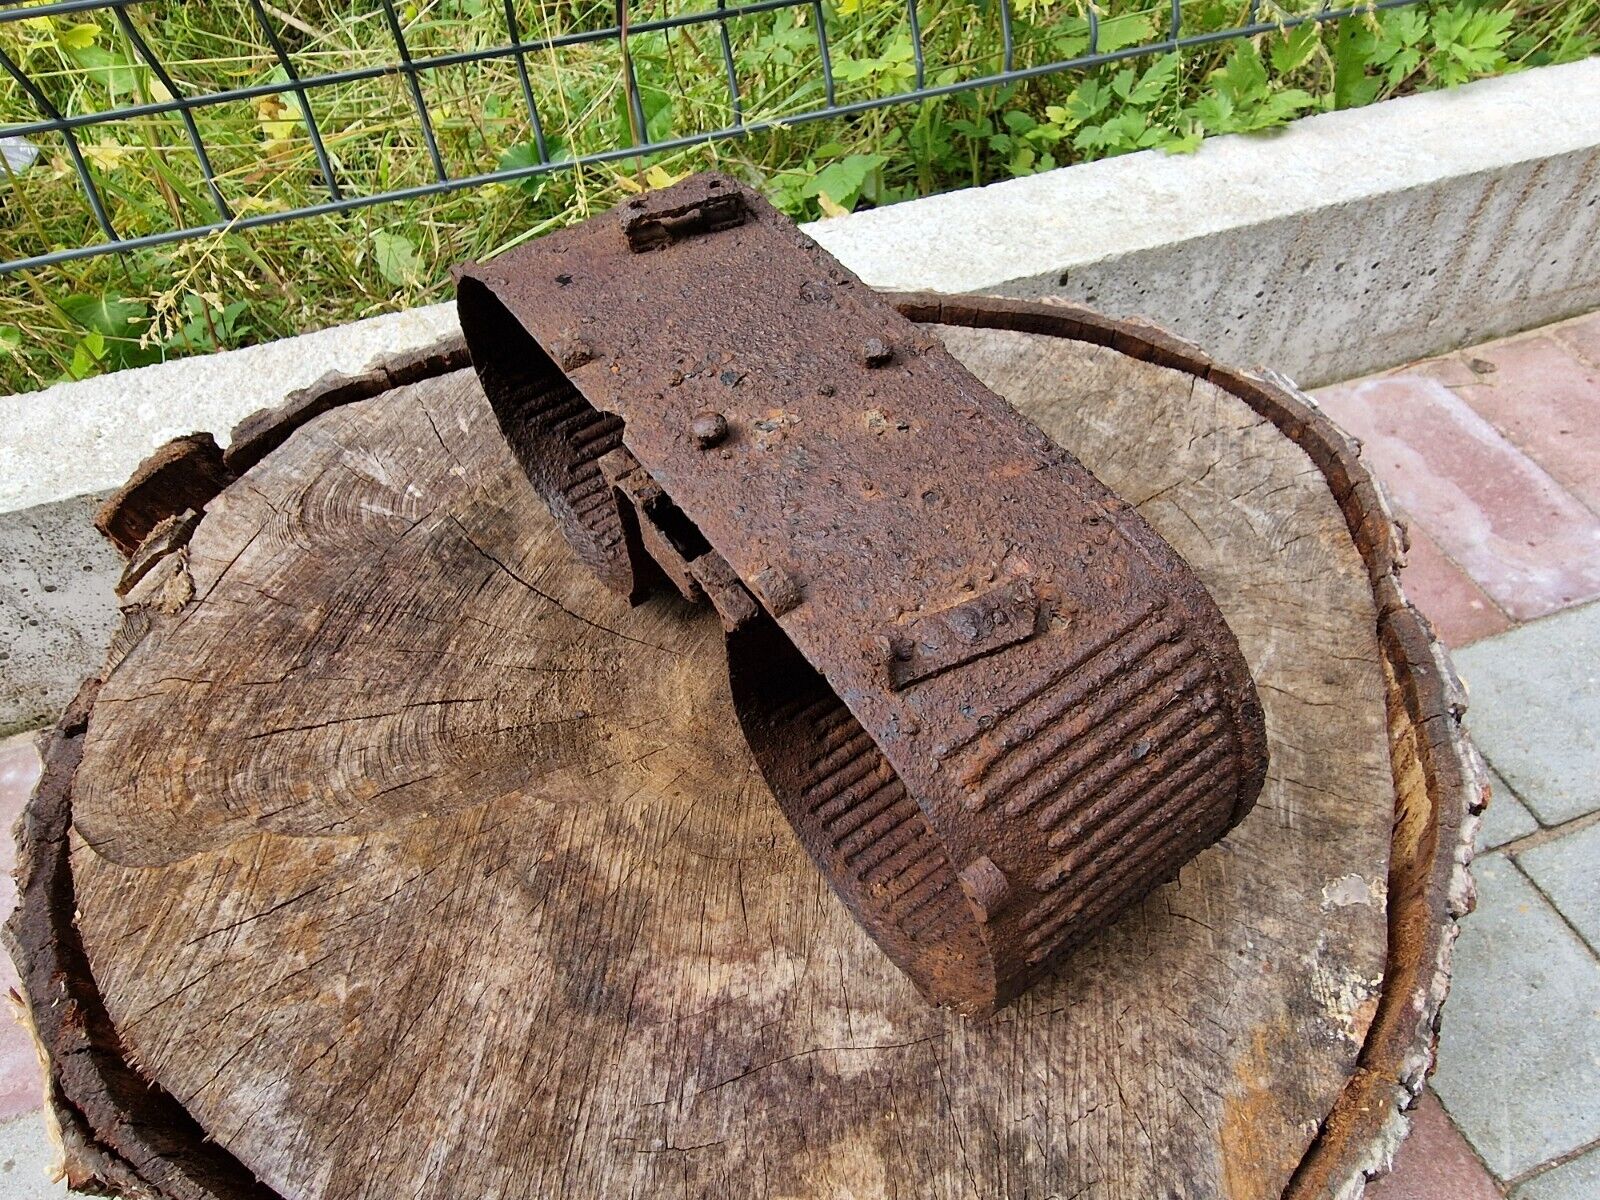 WW2 Accessories from the German bunker rare relic.